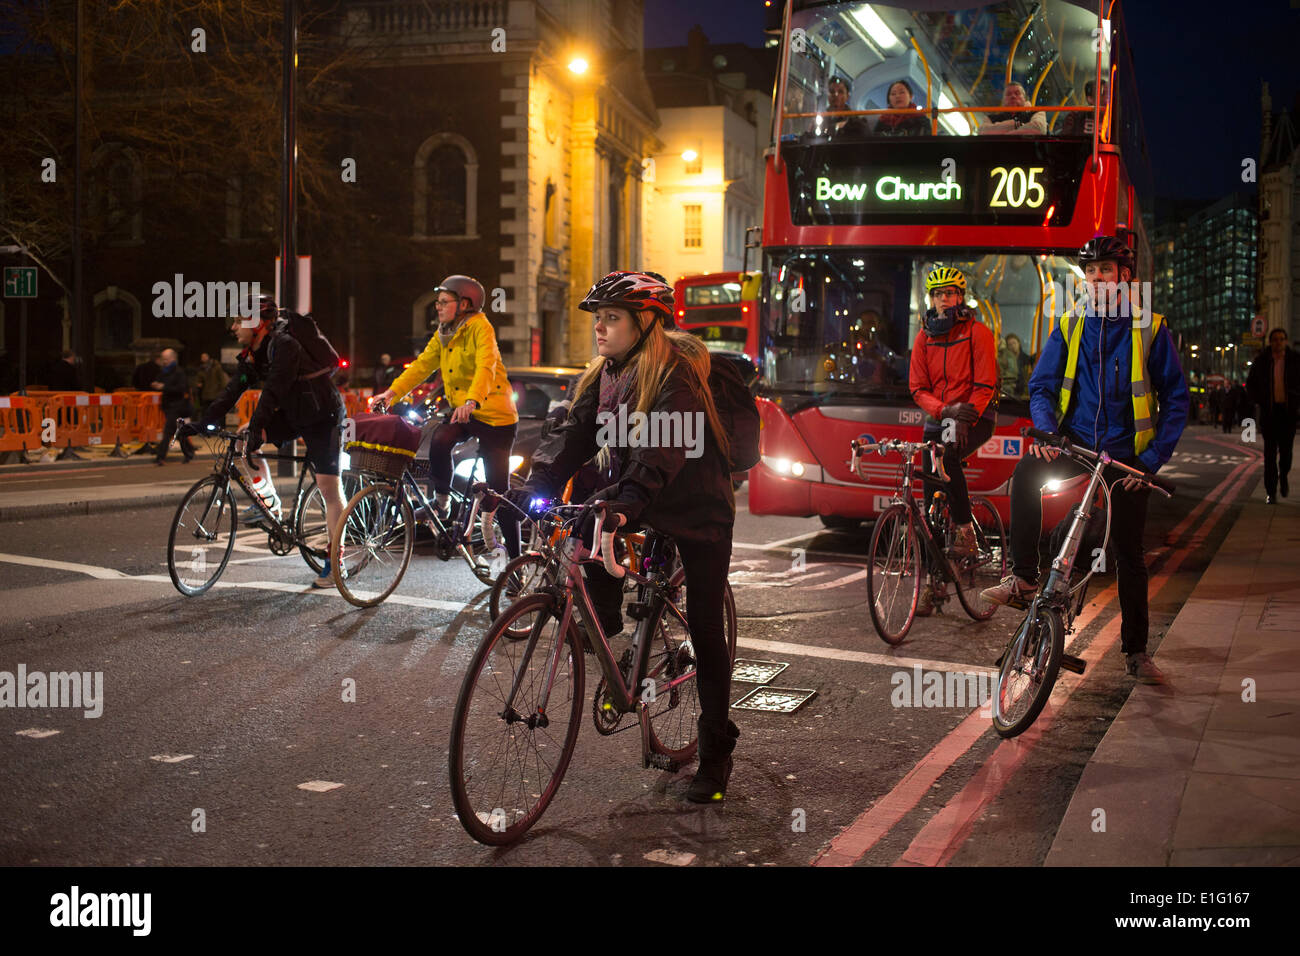 Cyclists waiting at traffic lights in the City of London. Cycling has become a very popular mode of transport in the capital. UK Stock Photo